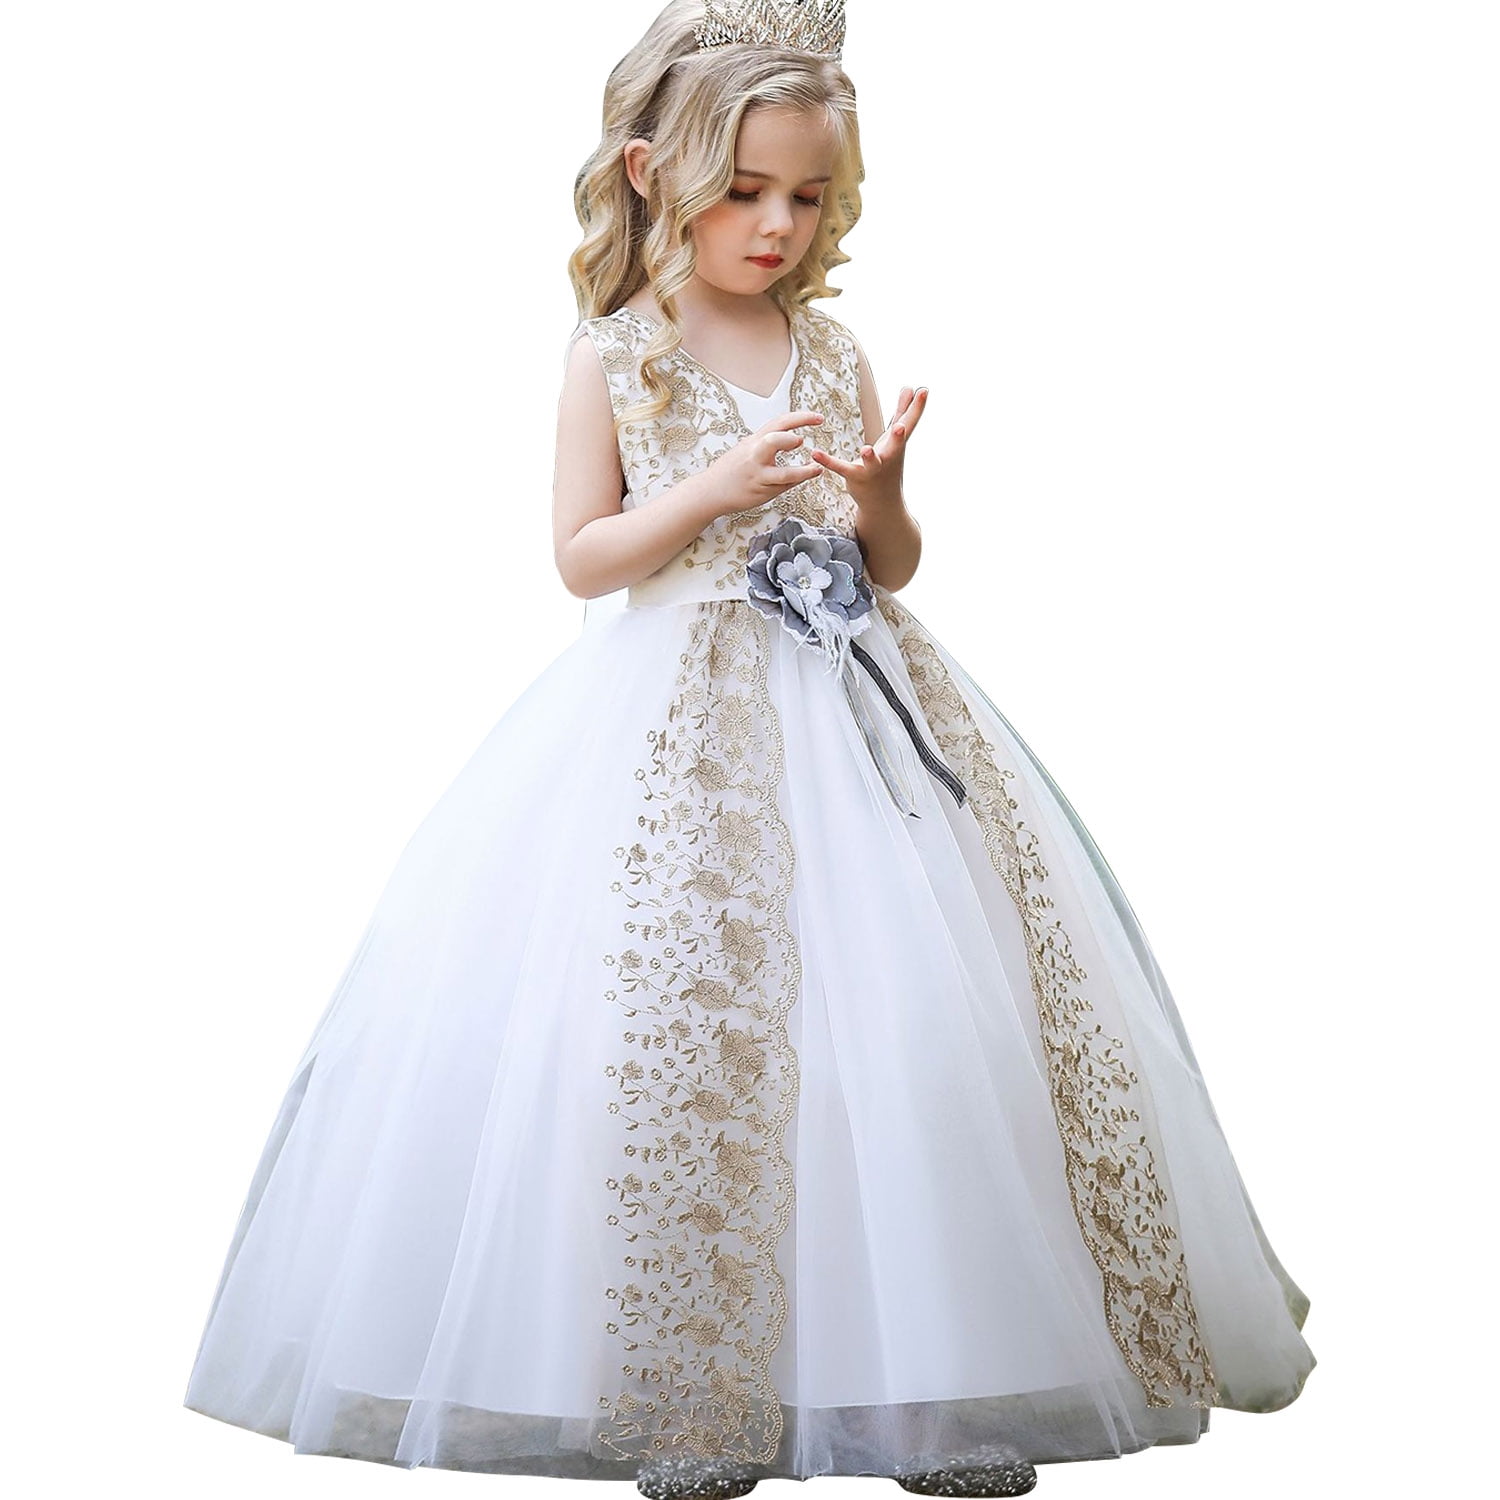 Gold Sequined Mermaid Flower Girl Dress For Weddings, Pageants, First  Communion 2019 Collection With Long Sleeves And Backless Design From  Newdeve, $101.12 | DHgate.Com